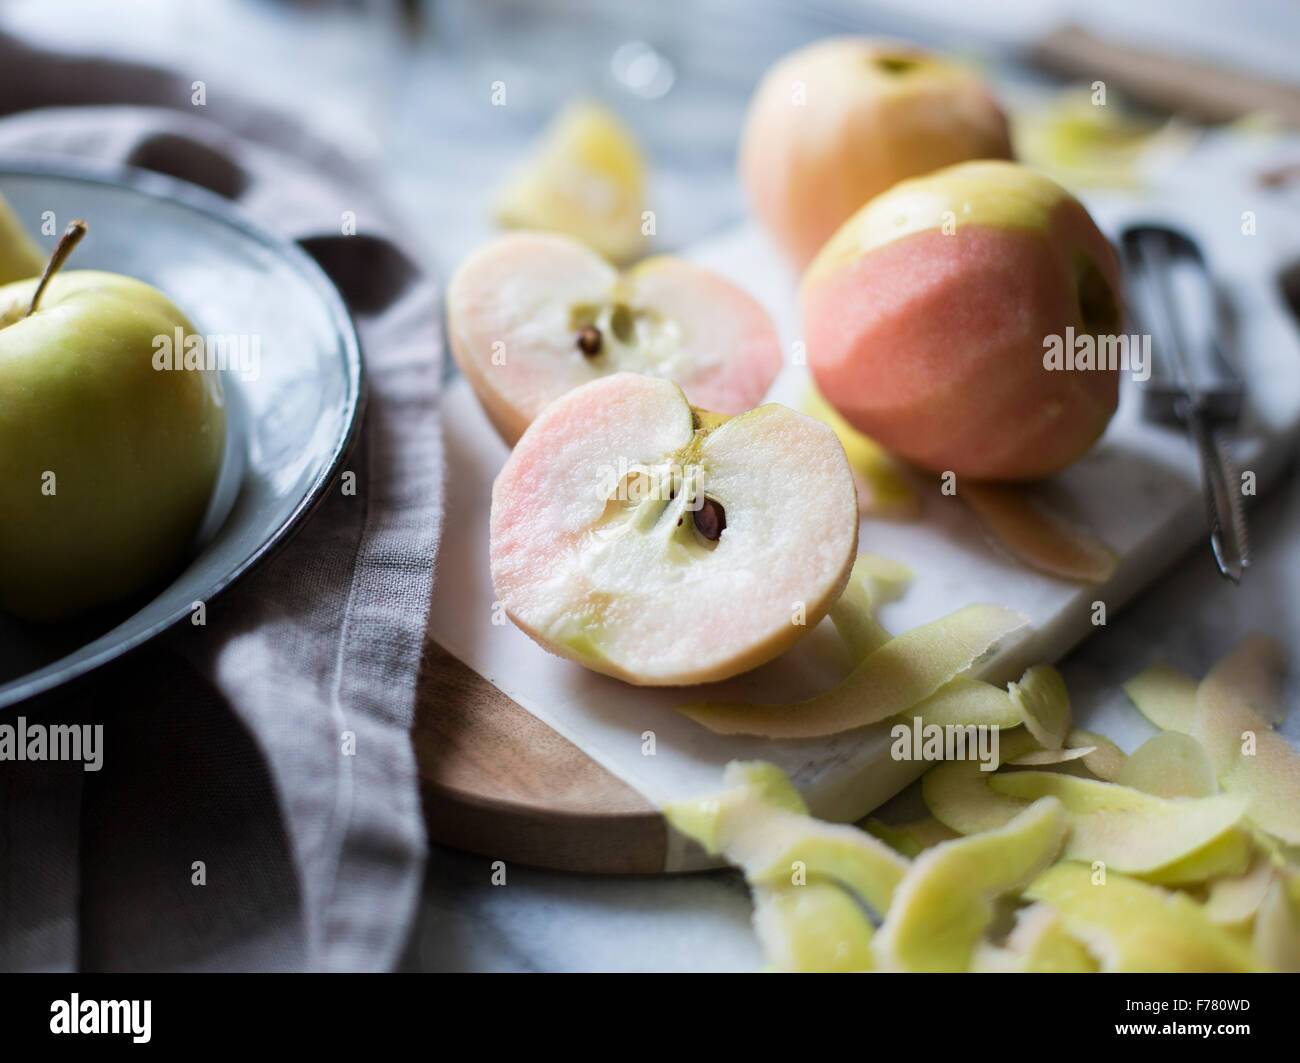 Apples peeled and prepared for cooking Stock Photo